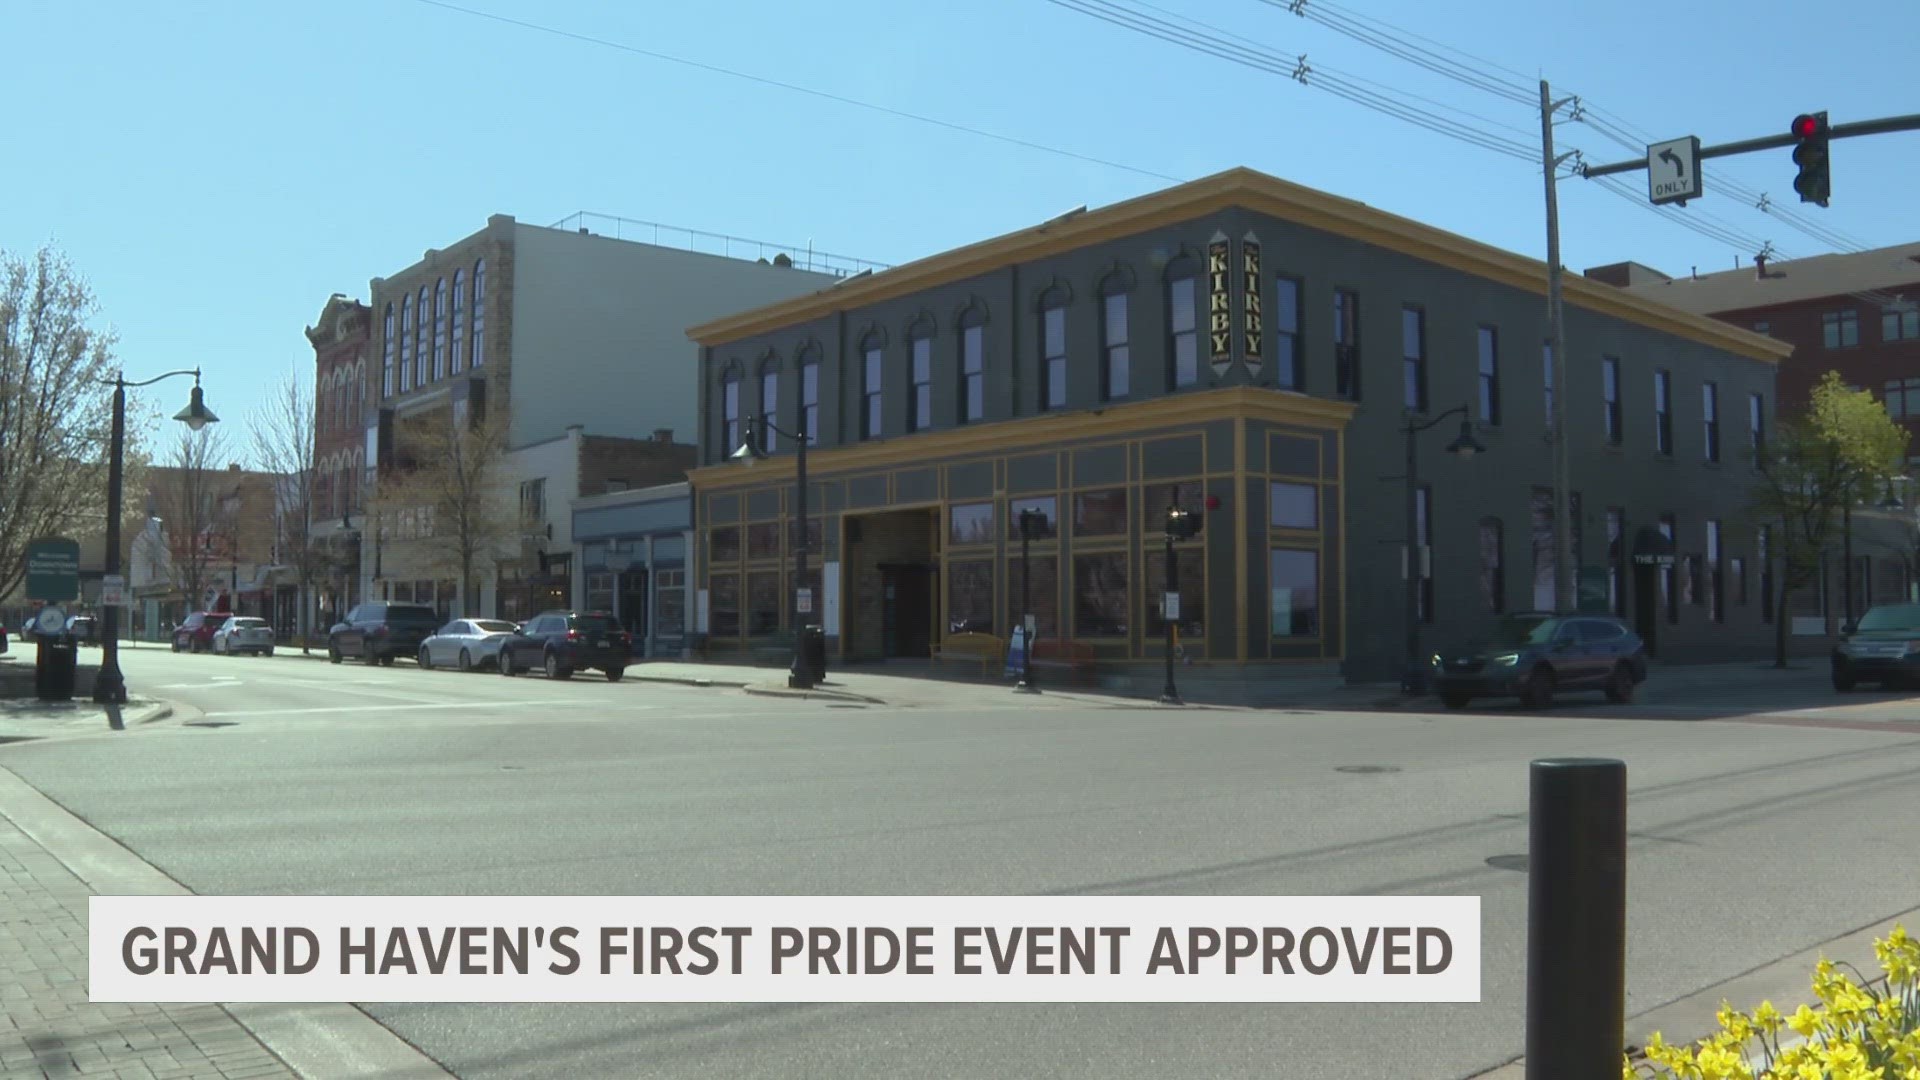 The city council has unanimously approved the festival, which will come to town in June.